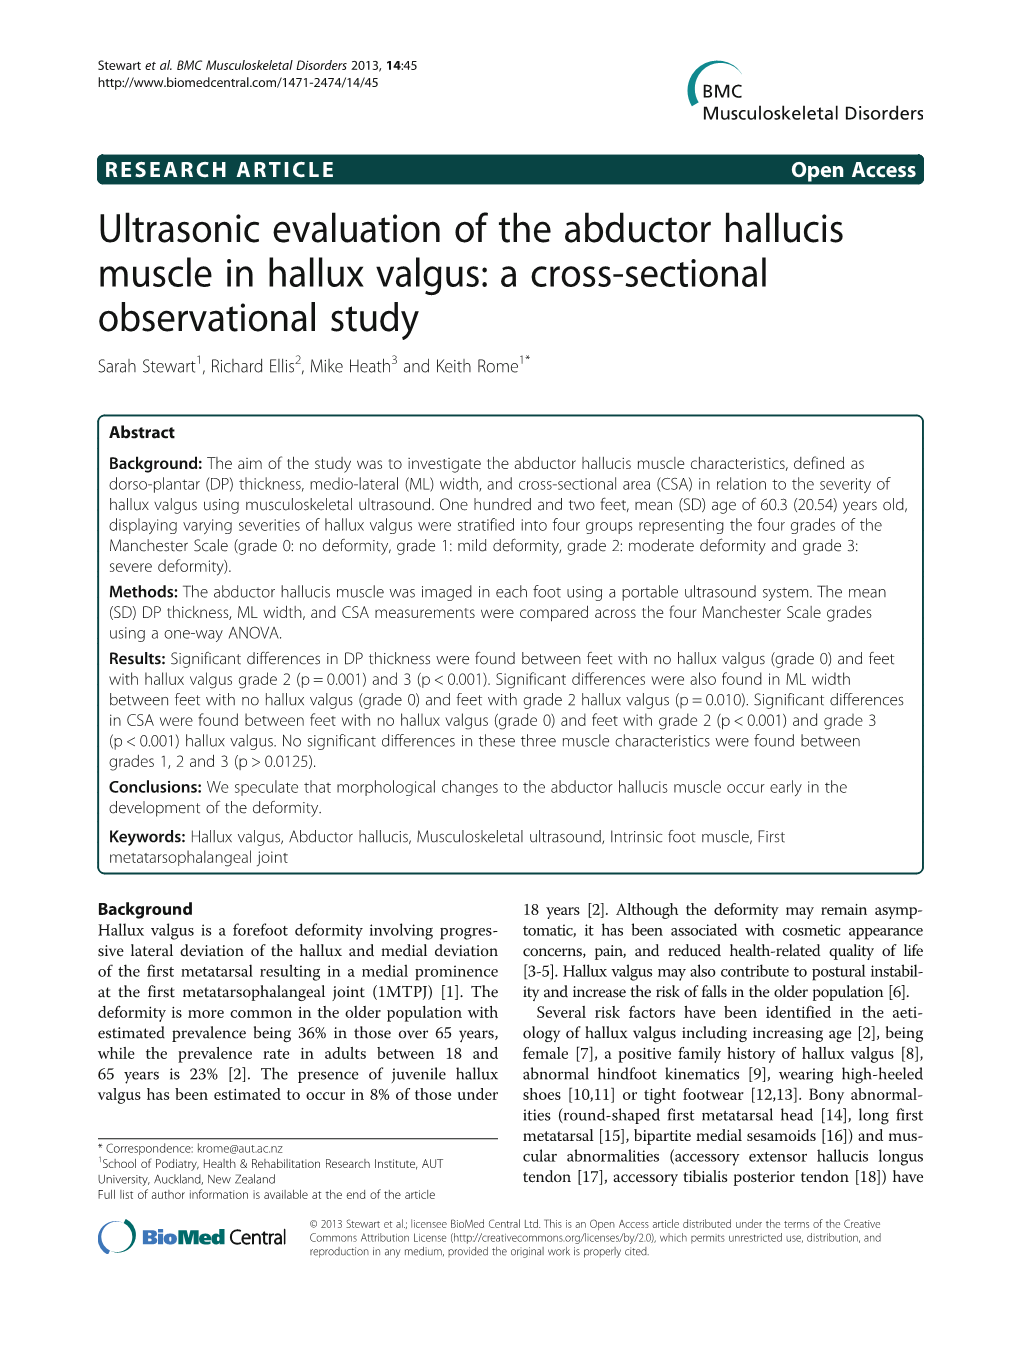 Ultrasonic Evaluation of the Abductor Hallucis Muscle In